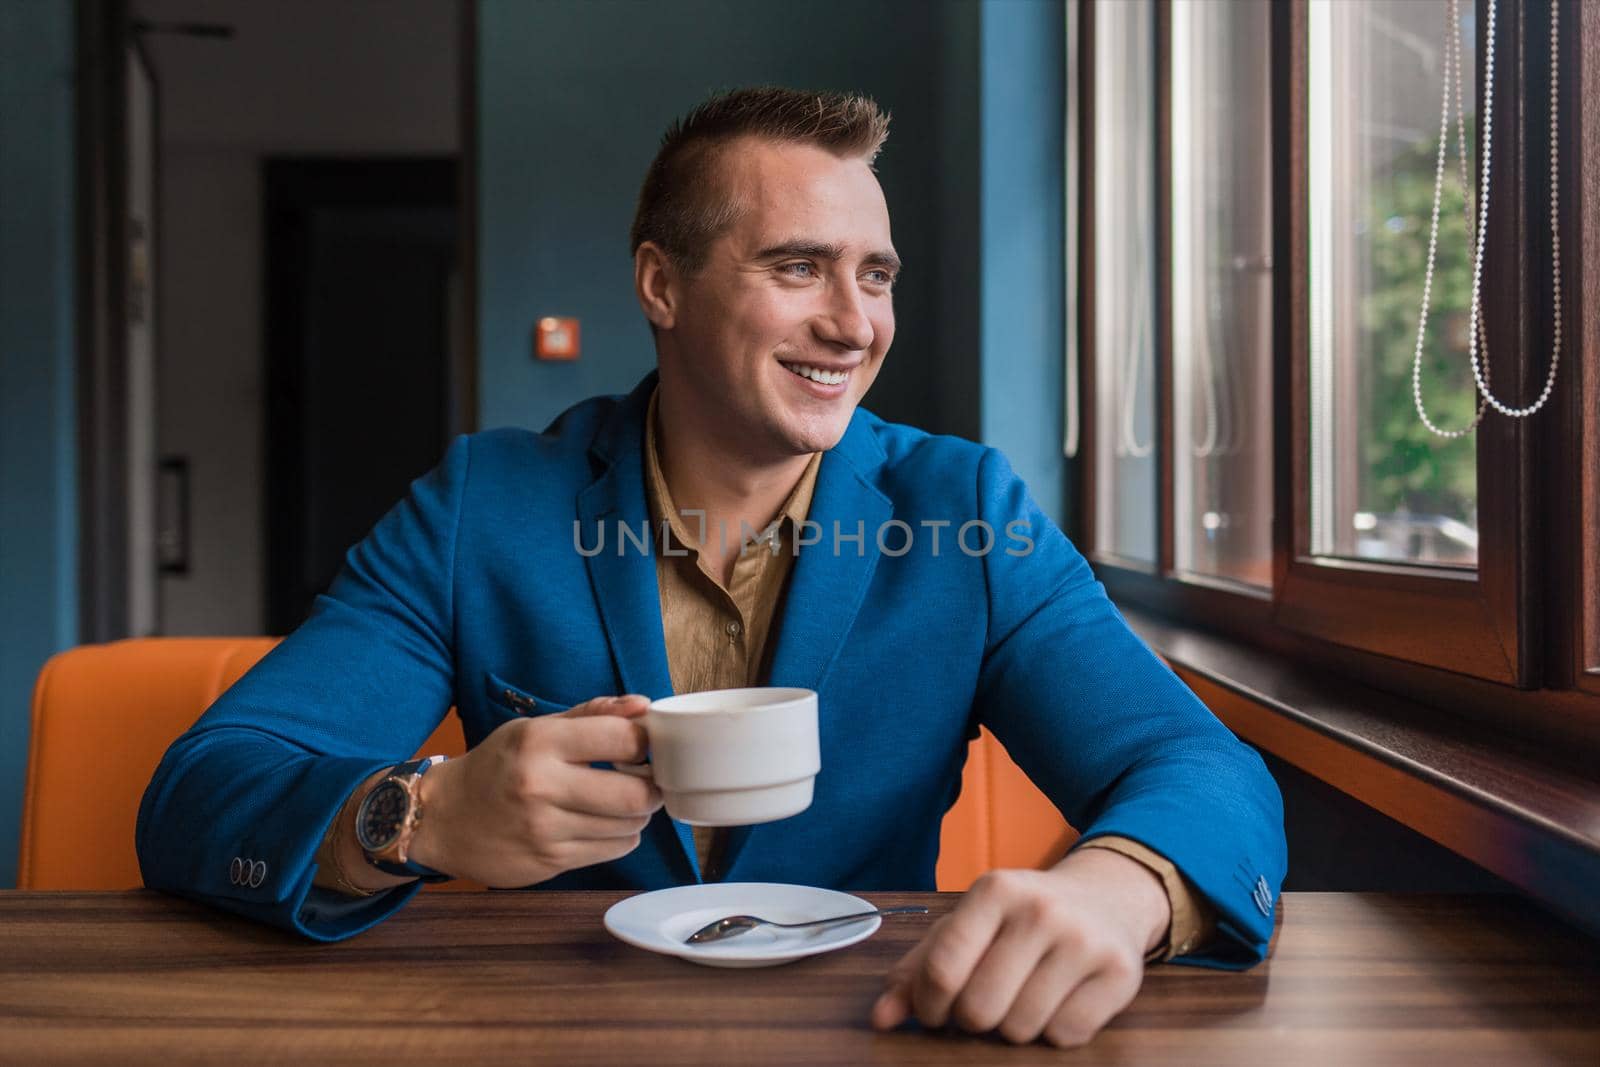 A stylish, positive businessman of Caucasian appearance, a man in a jacket and shirt sits at a table in a cafe on a coffee break and looks away or out the window.